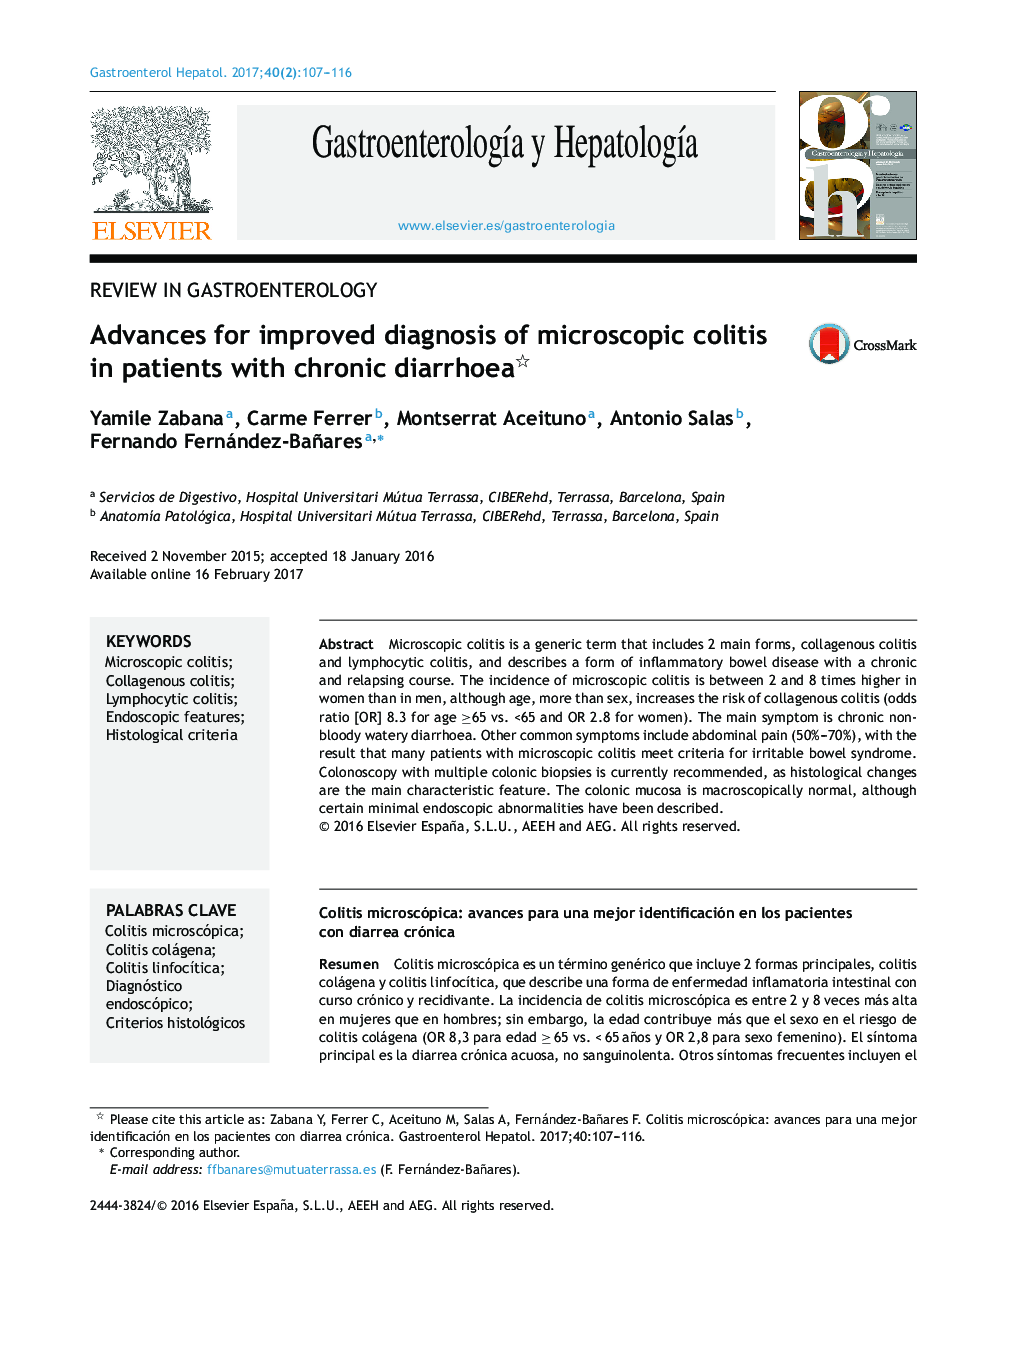 Advances for improved diagnosis of microscopic colitis in patients with chronic diarrhoea